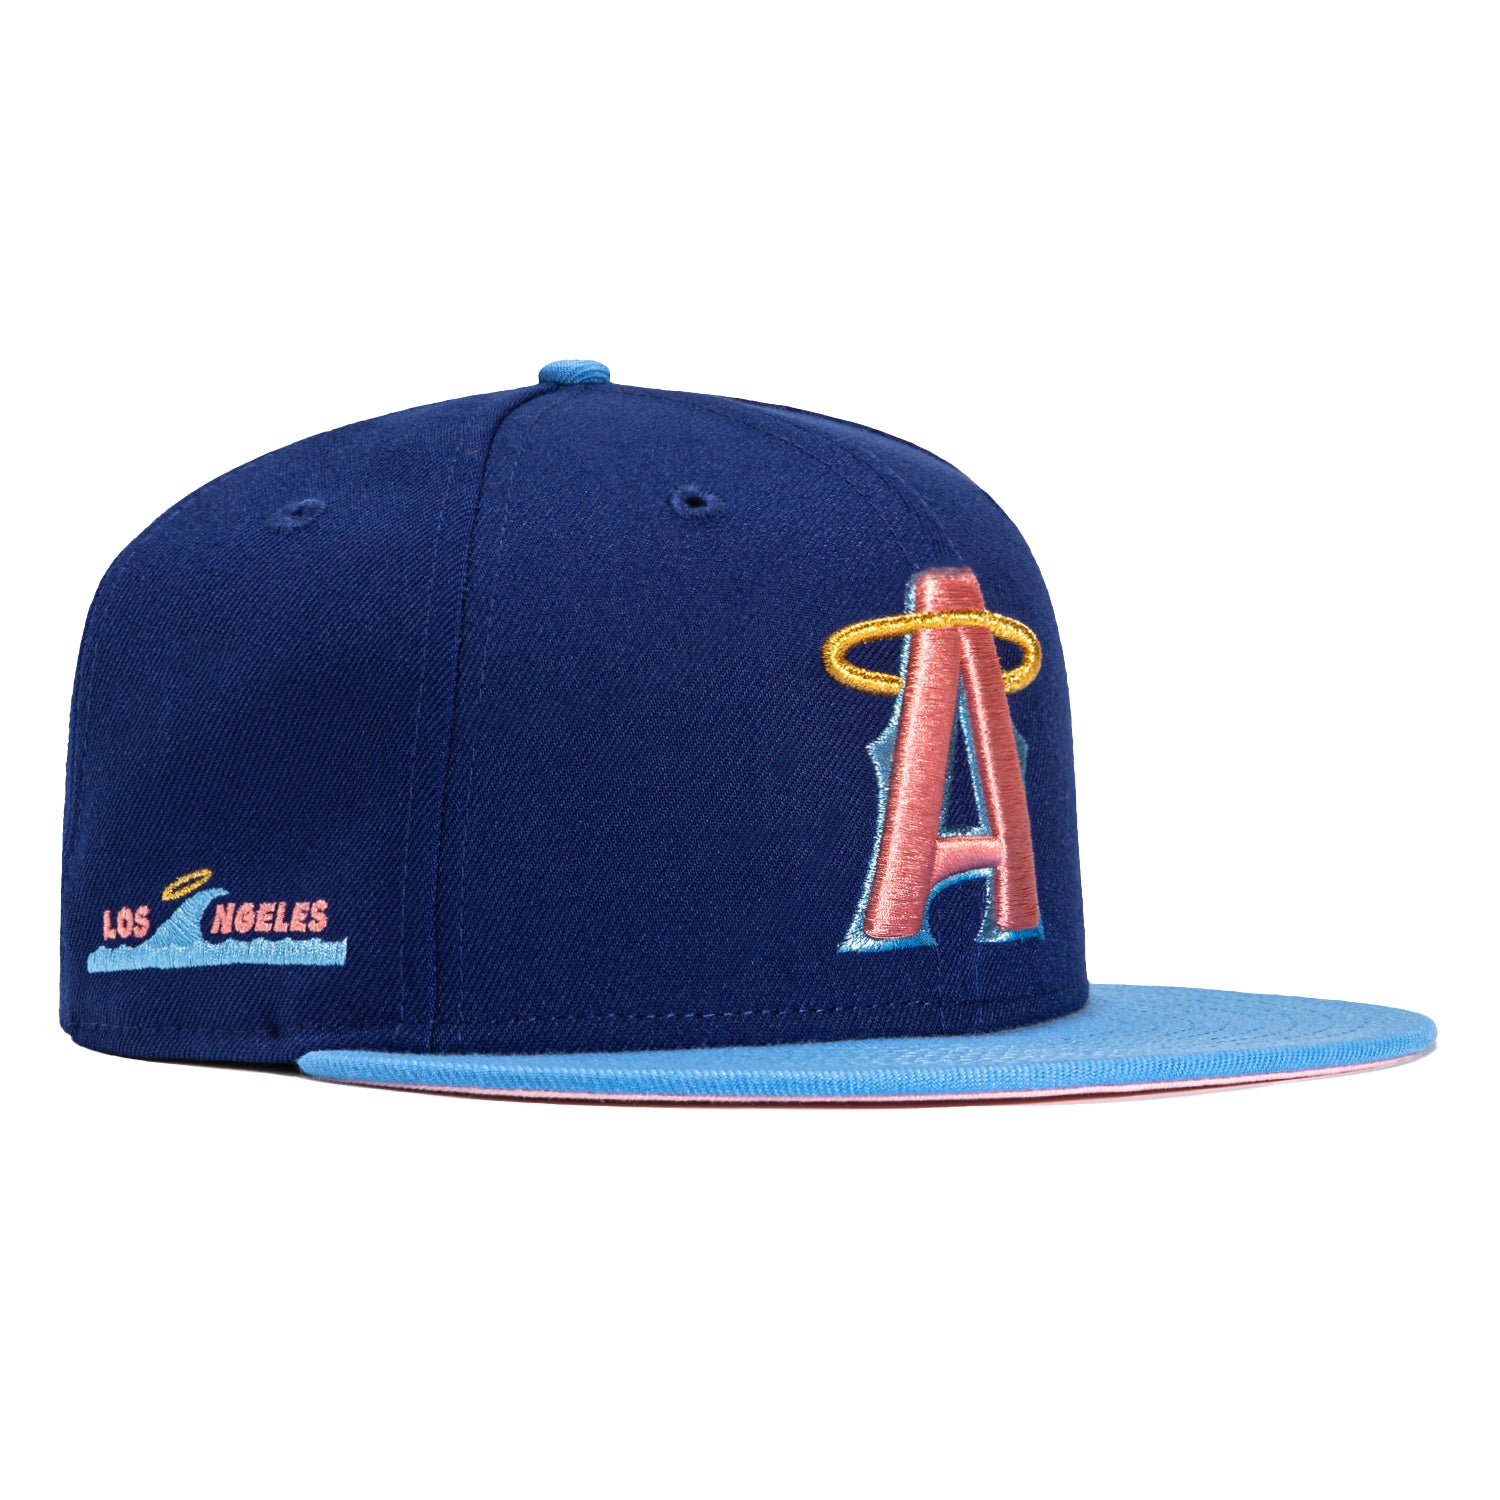 angel city connect hat